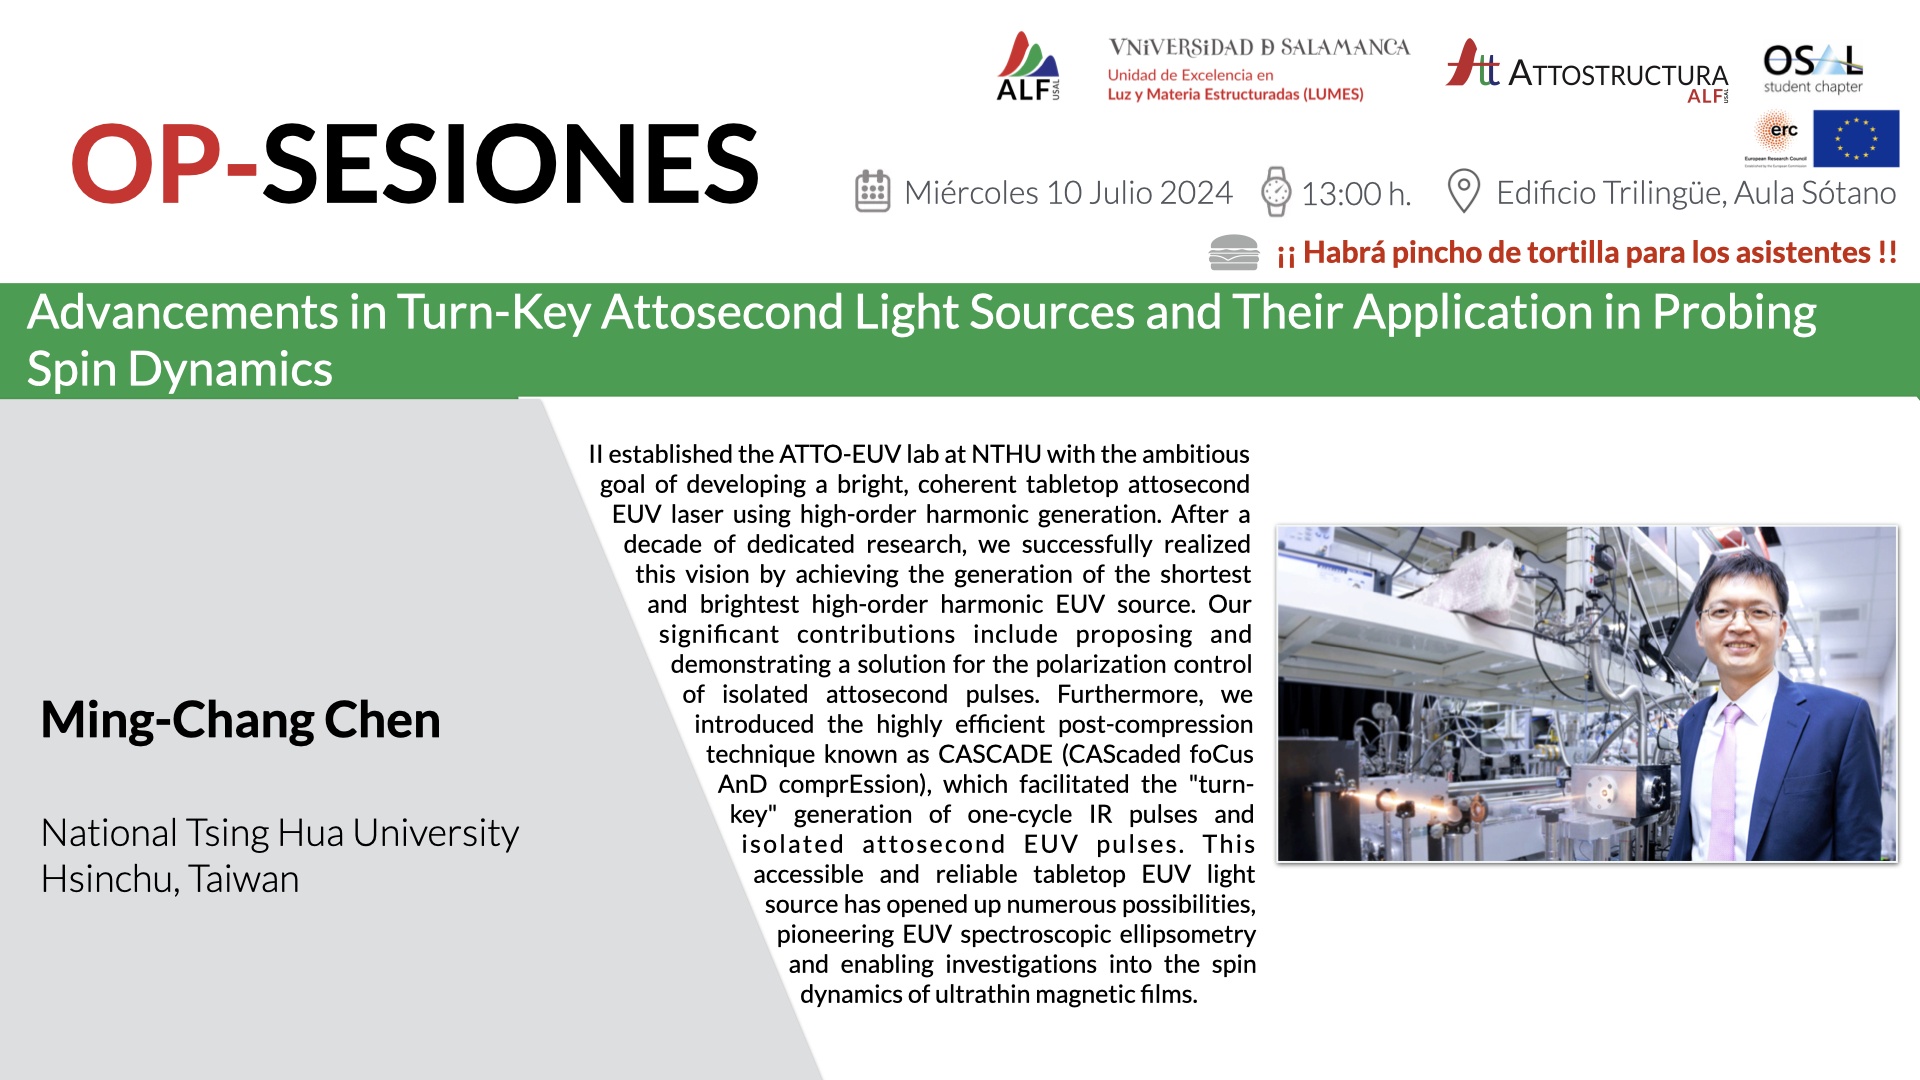 OP Session – Advancements in Turn-Key Attosecond Light Sources and Their Application in Probing Spin Dynamics